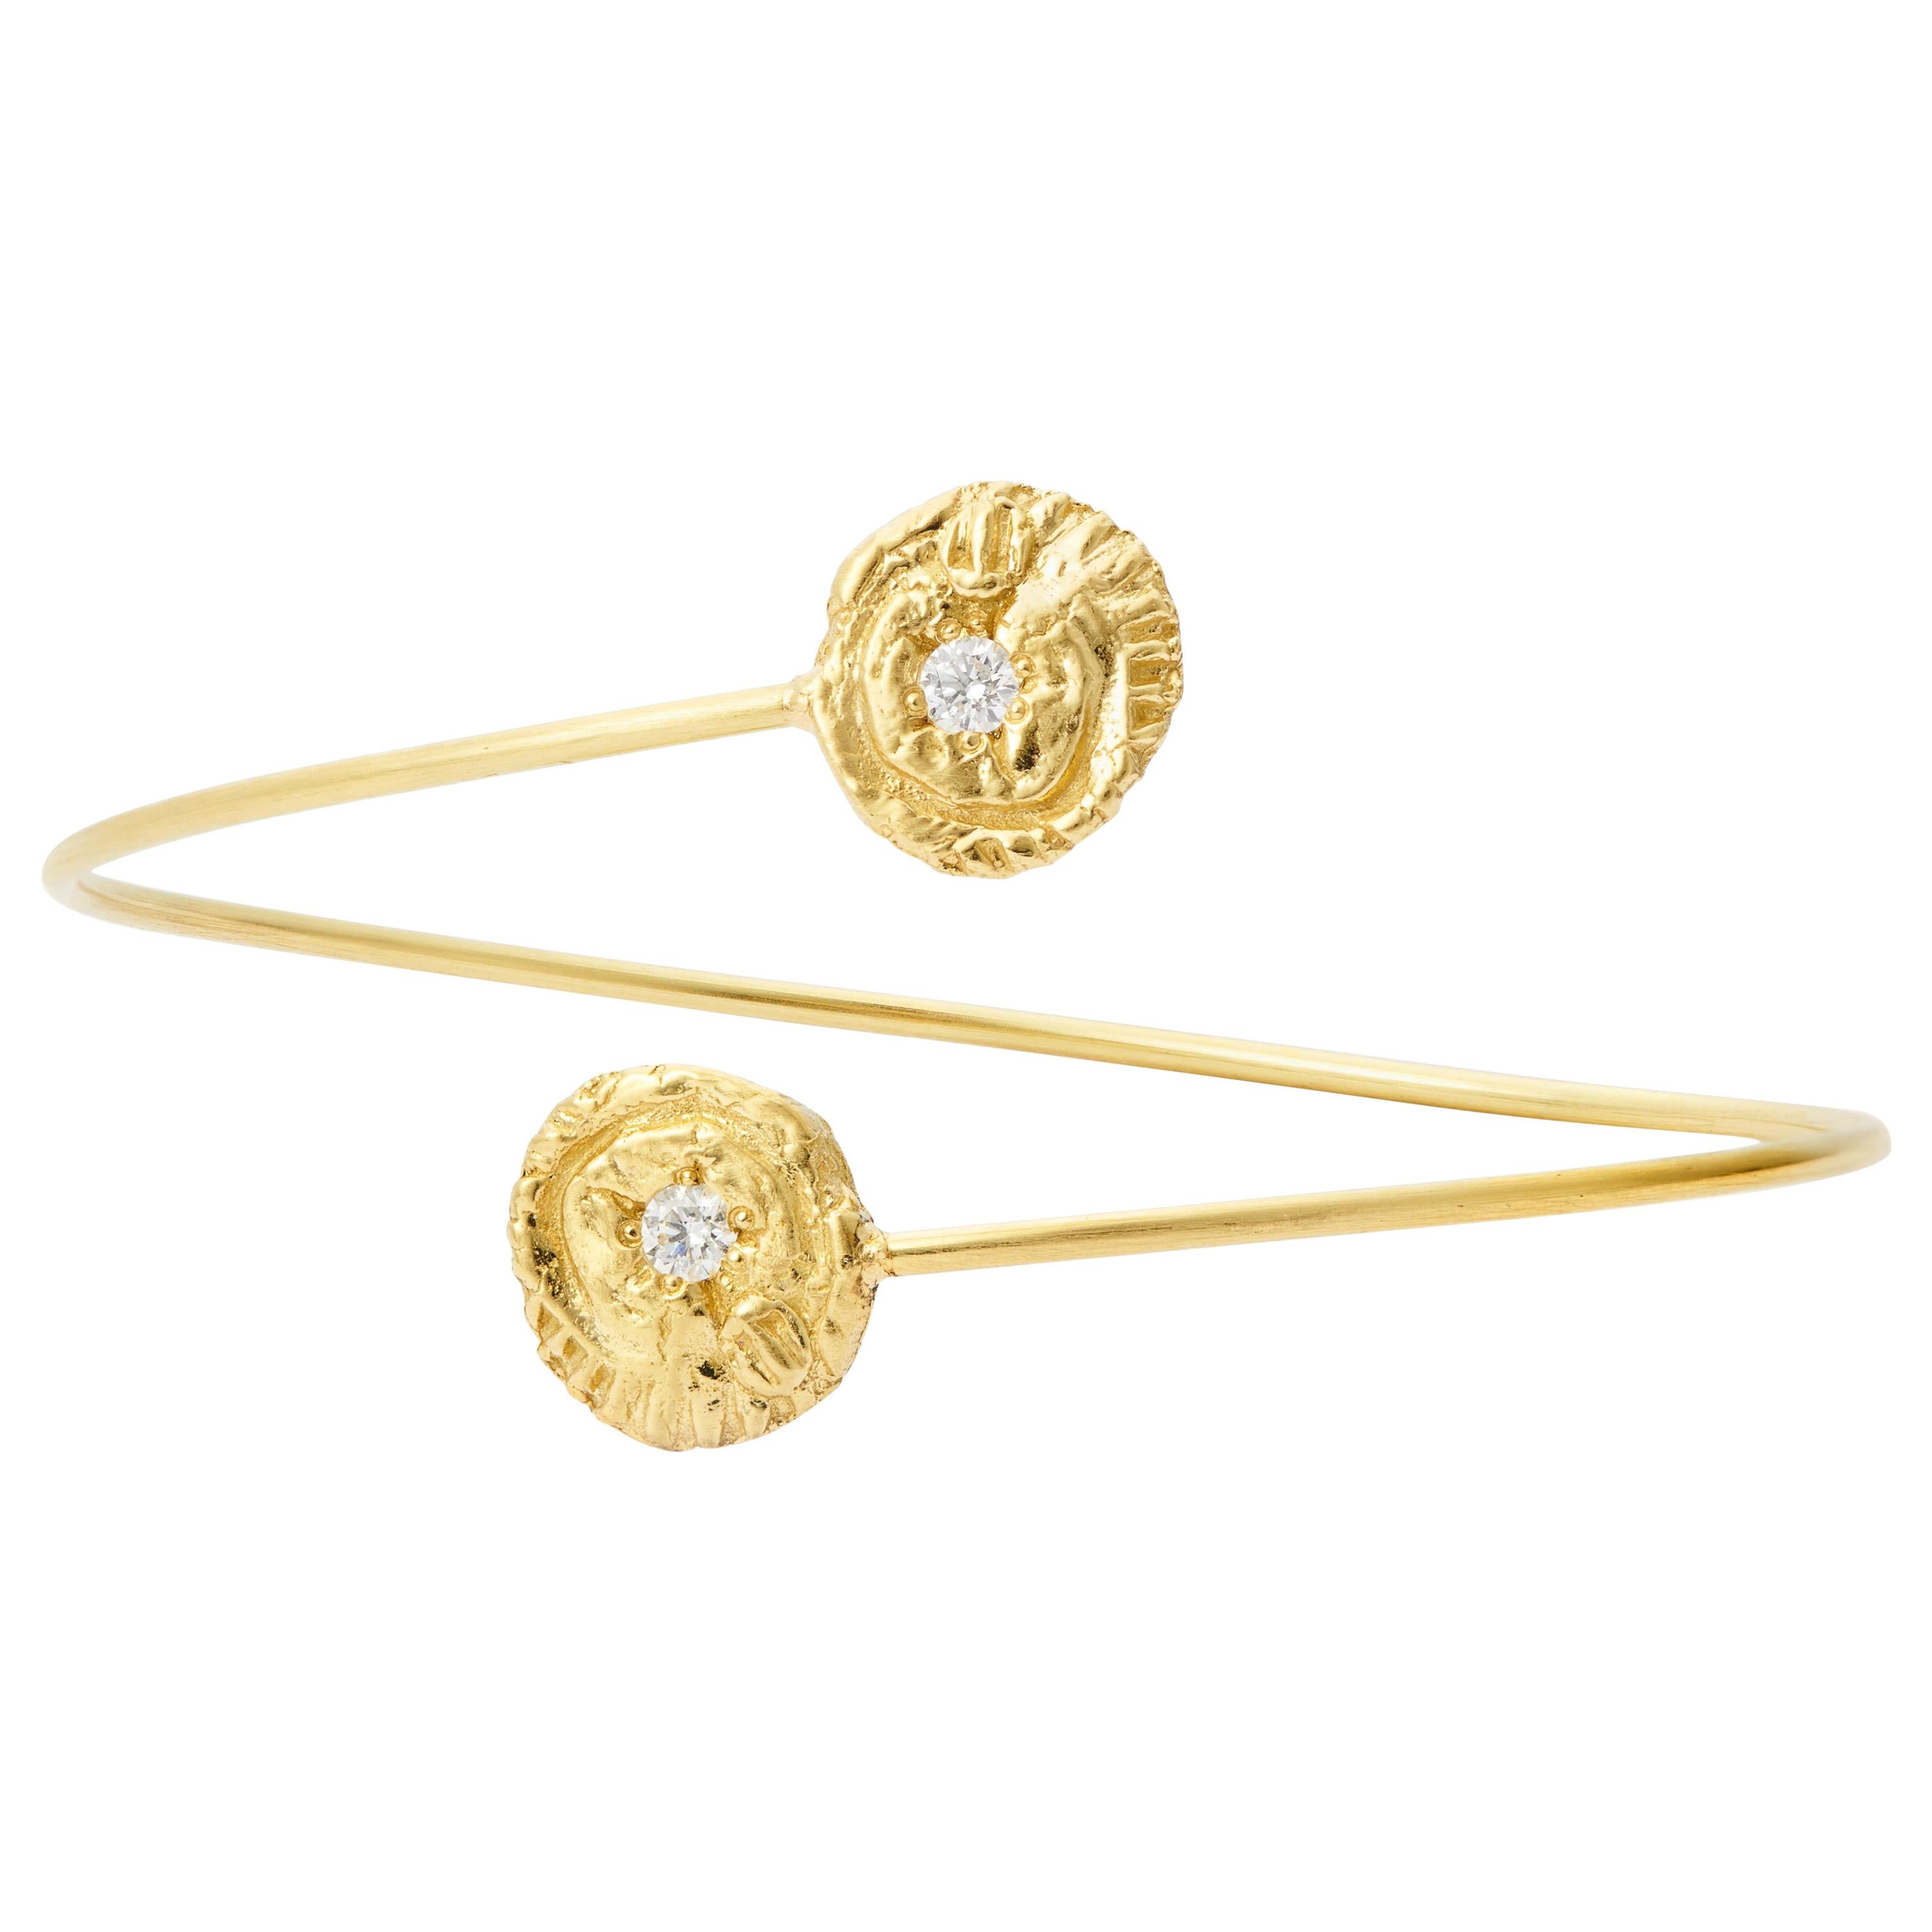 Susan Lister Locke “Sea Star” and 0.20 Carat Diamond Bypass Bracelet in 18K Gold For Sale